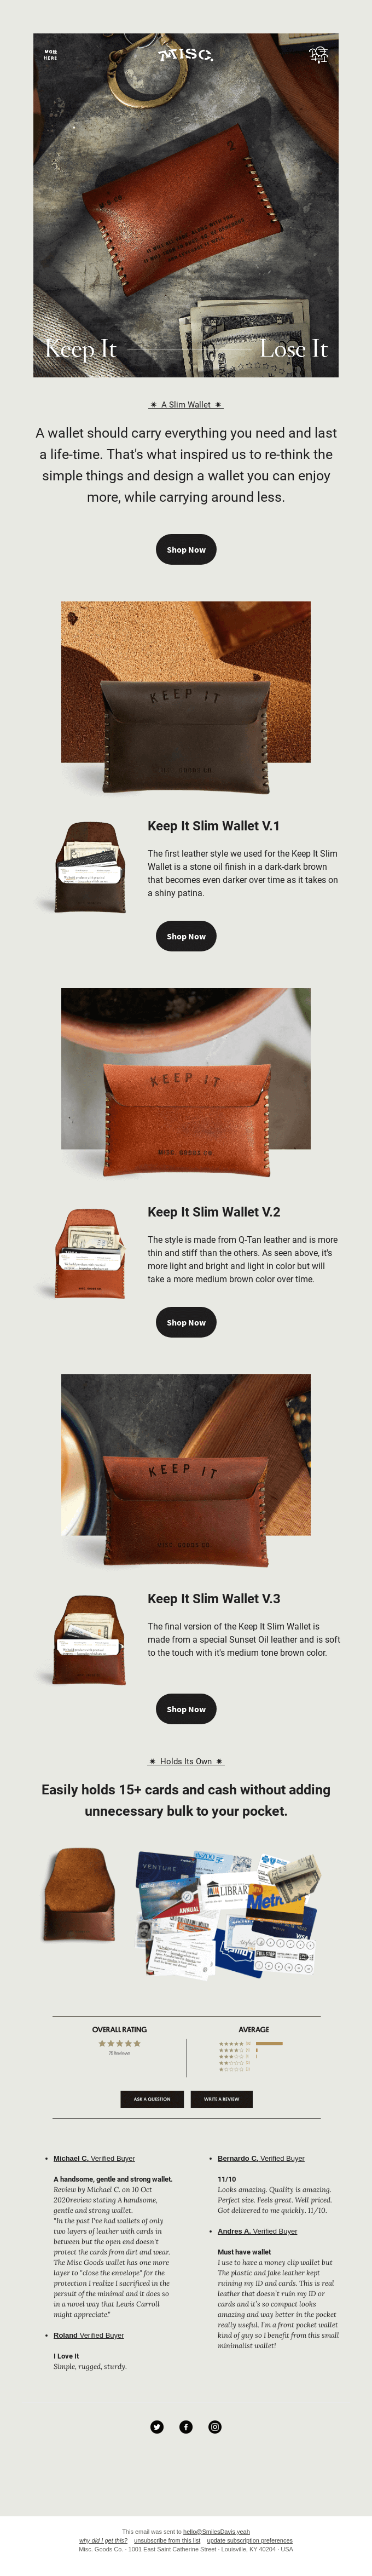 A Classic, the Keep It Wallet ☼